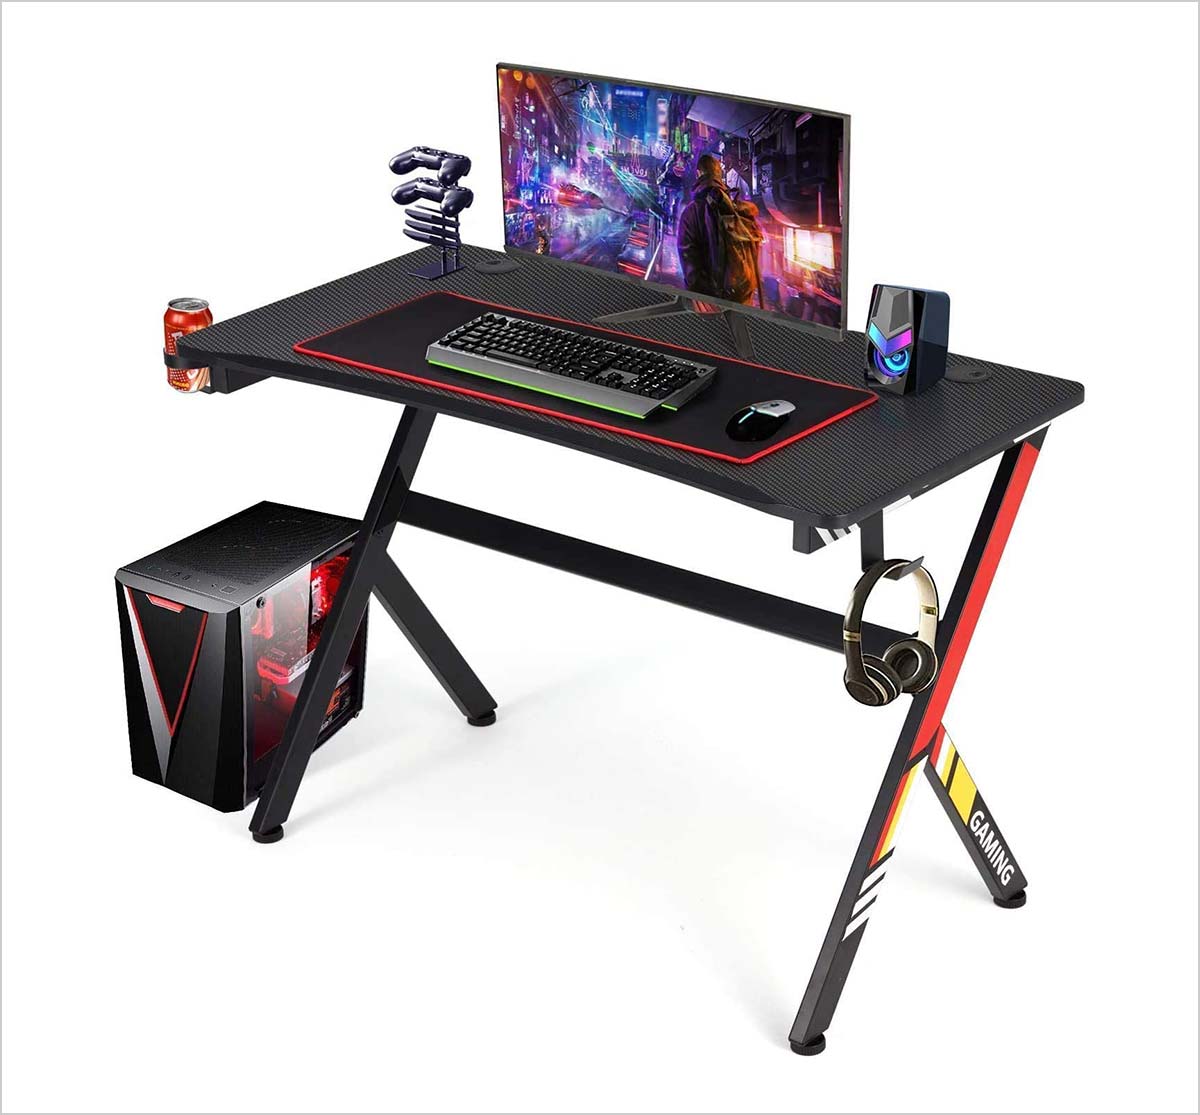 https://www.designbolts.com/wp-content/uploads/2021/06/Gaming-Table-Home-Computer-Desk-with-Mouse-Mat.jpg